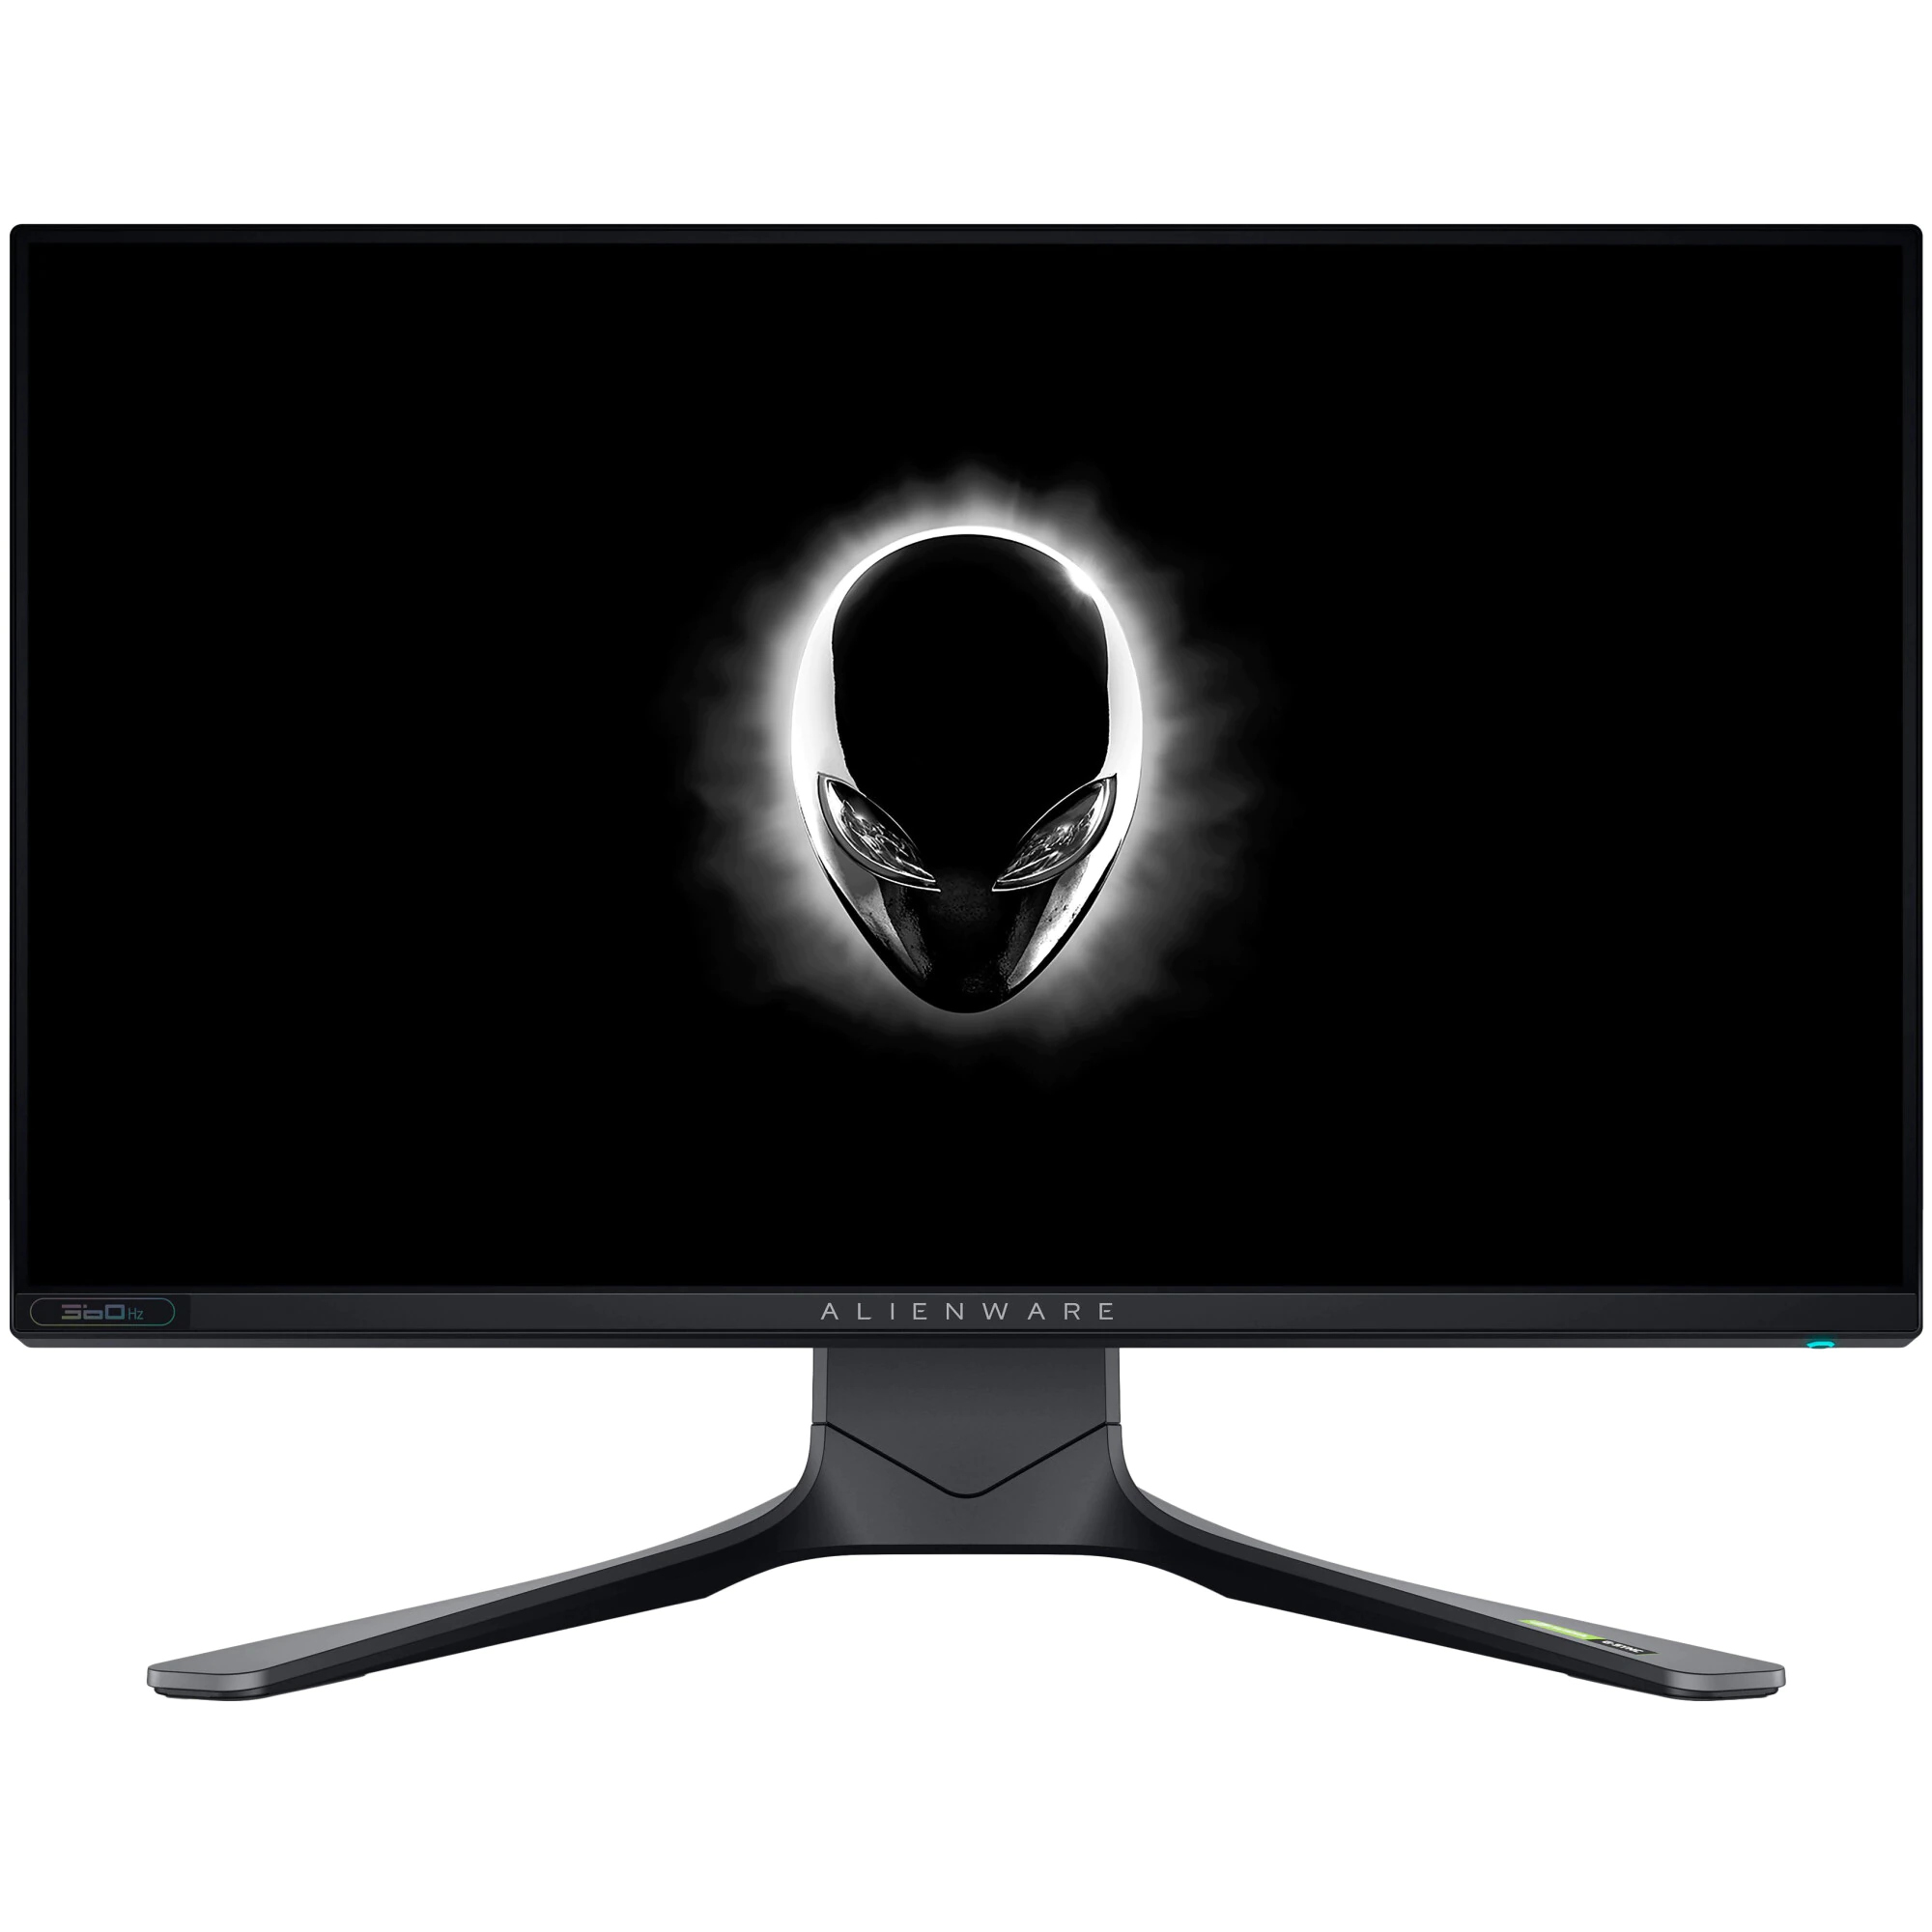  Monitor Gaming LED Dell Alienware AW2521H, 24.5", Full HD, IPS, 360 Hz, 1 ms, HDMI, DP, FreeSync, G-Sync, Negru 